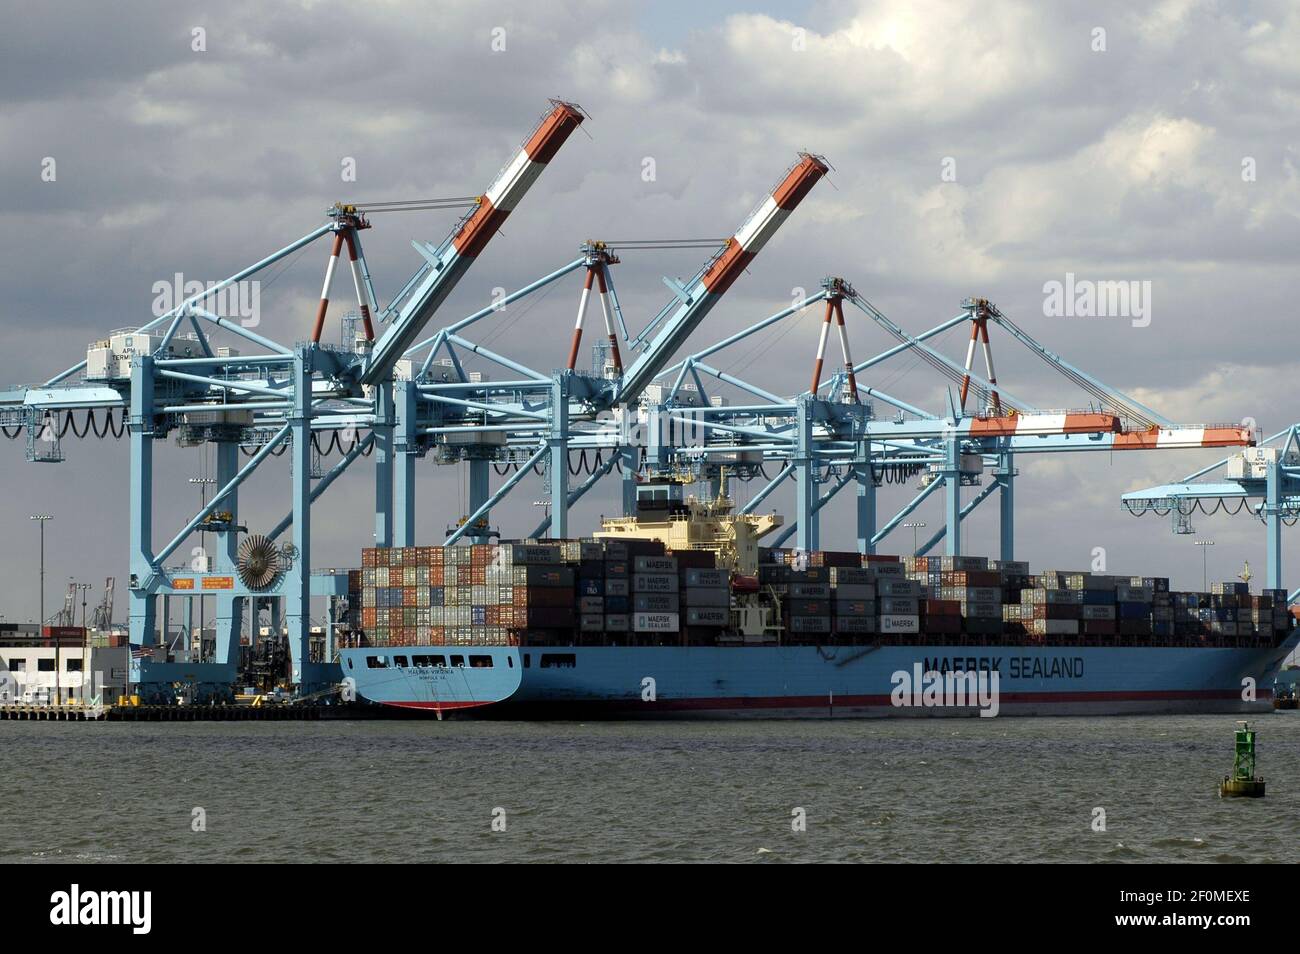 Container ships of the Maersk Sea Land lines load in Port Elizabeth, NJ on  May 20, 2006. A.P. Moeller-Maersk is one of the companies hit by a  cyberattack. (Photo by Richard B.